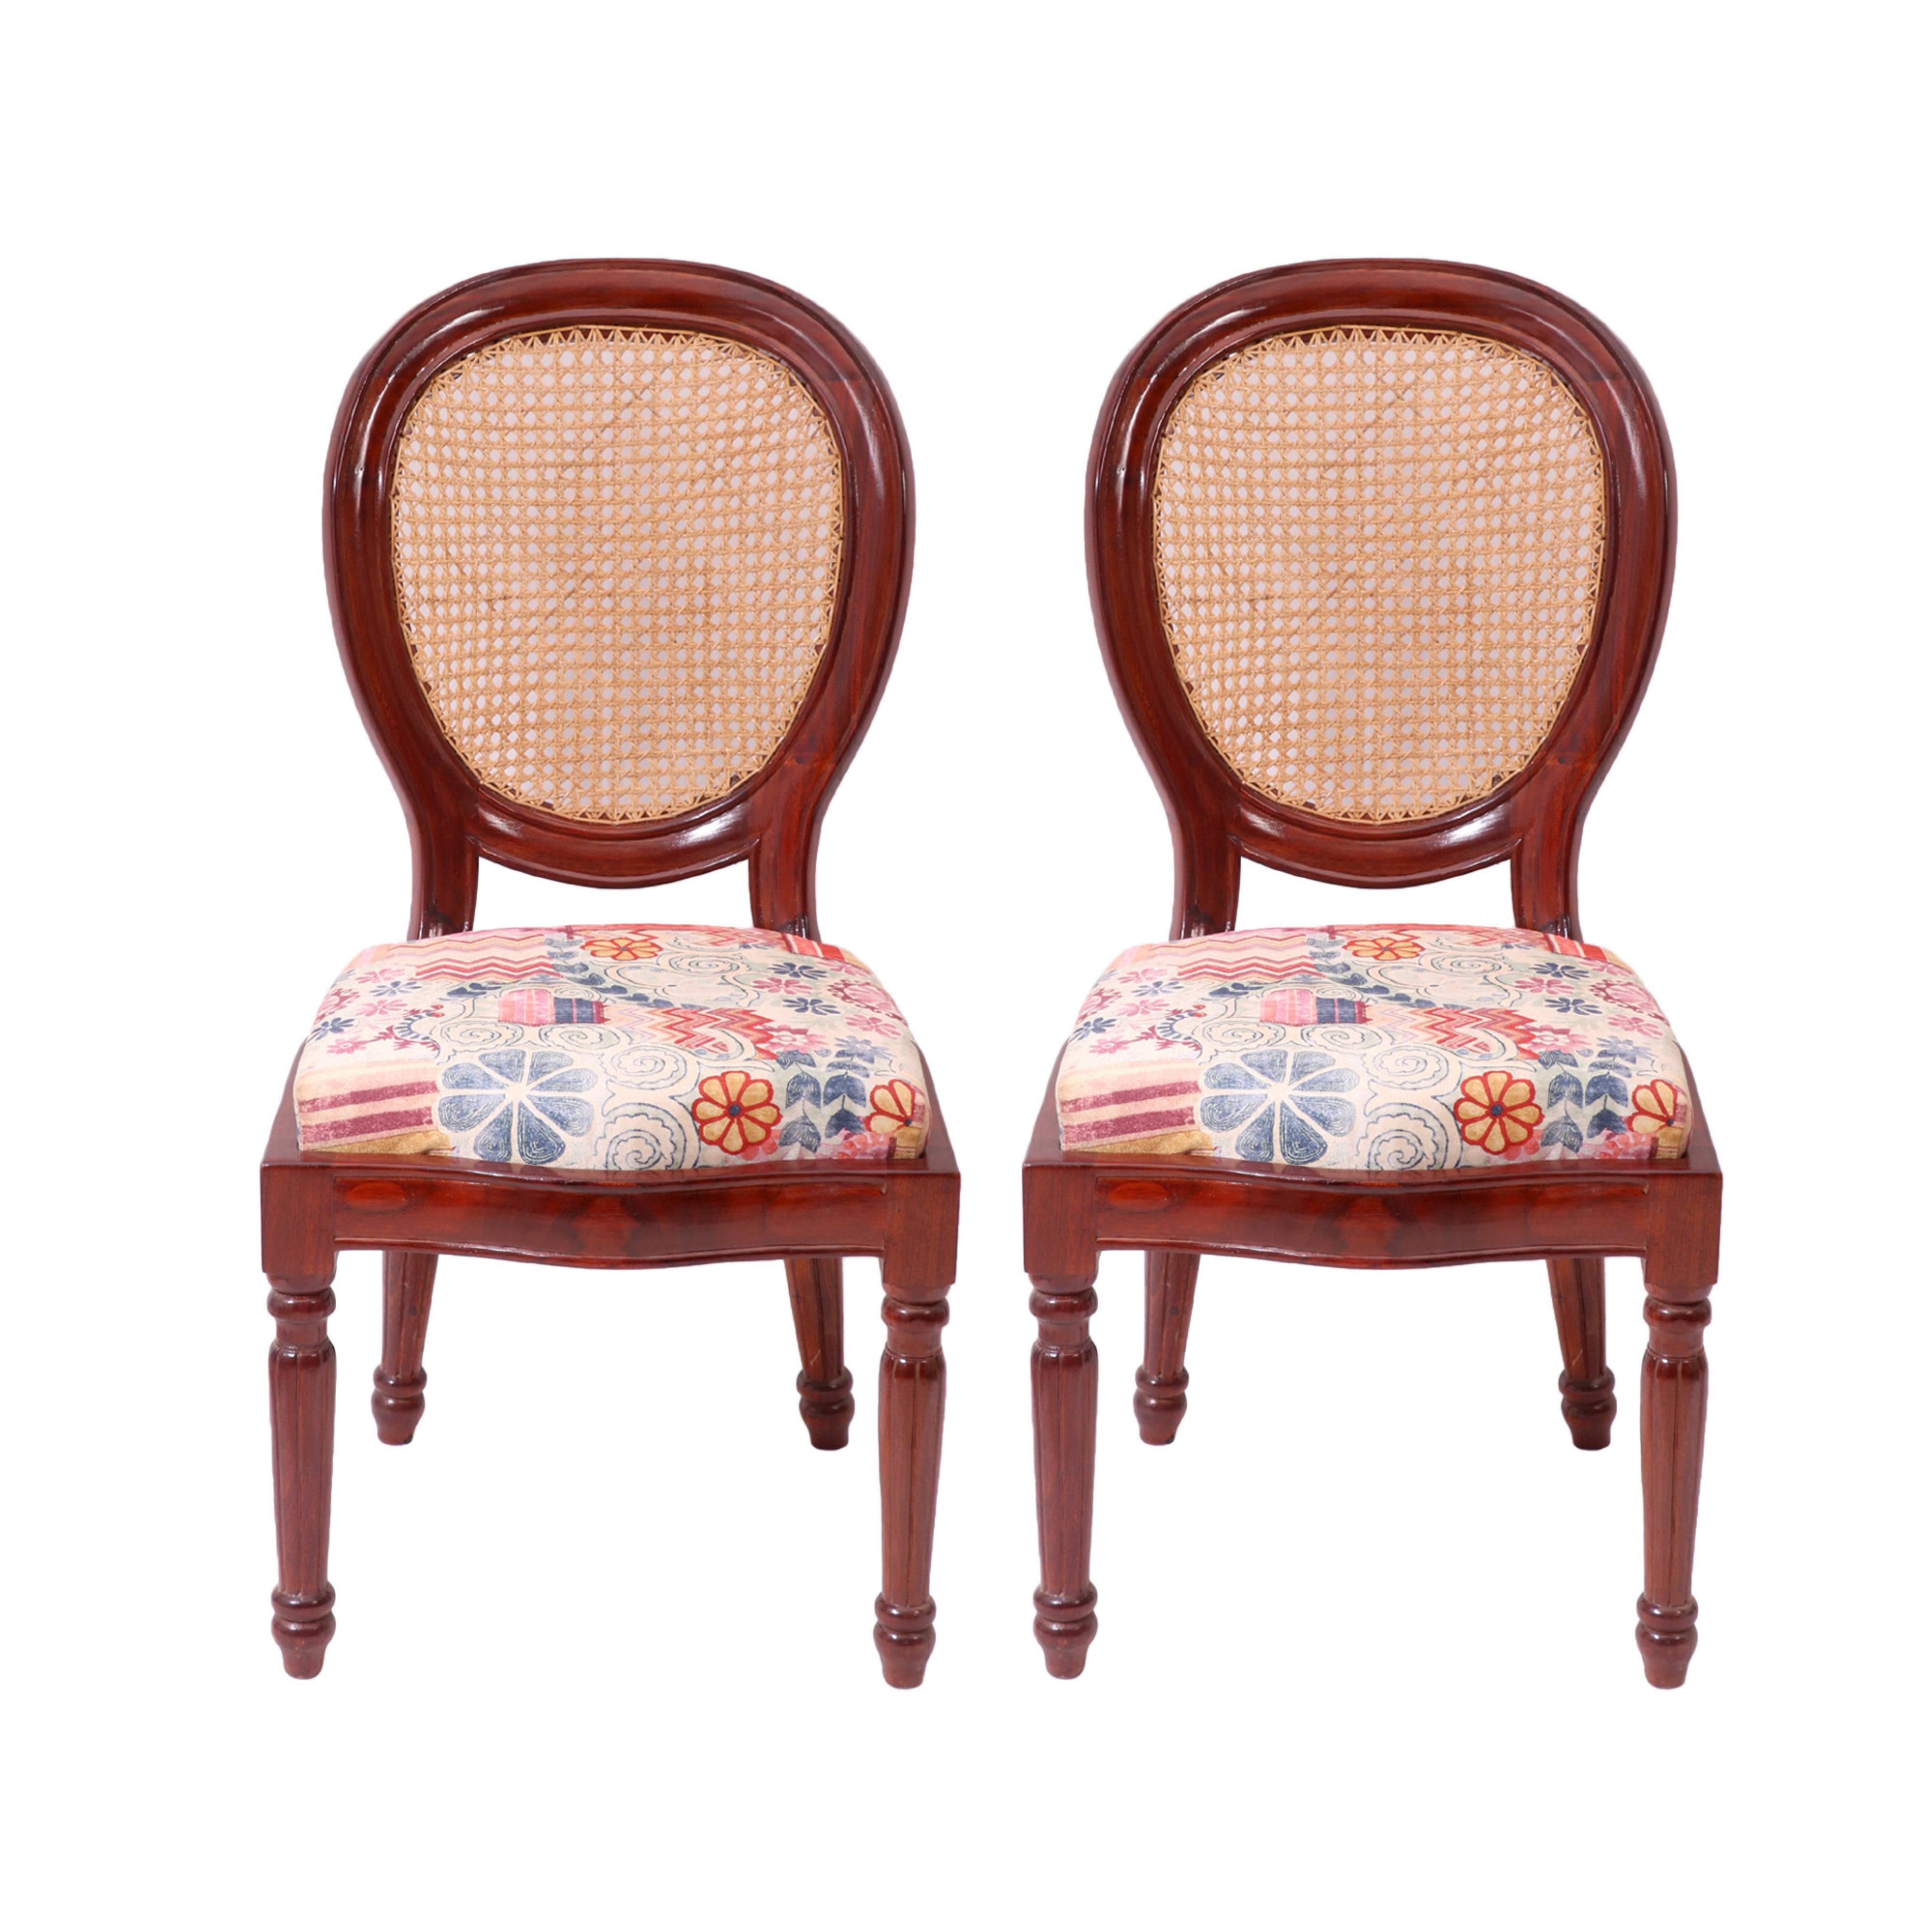 (Set of 2) Teak wood curved spherical authentic Cane dining chair Dining Chair